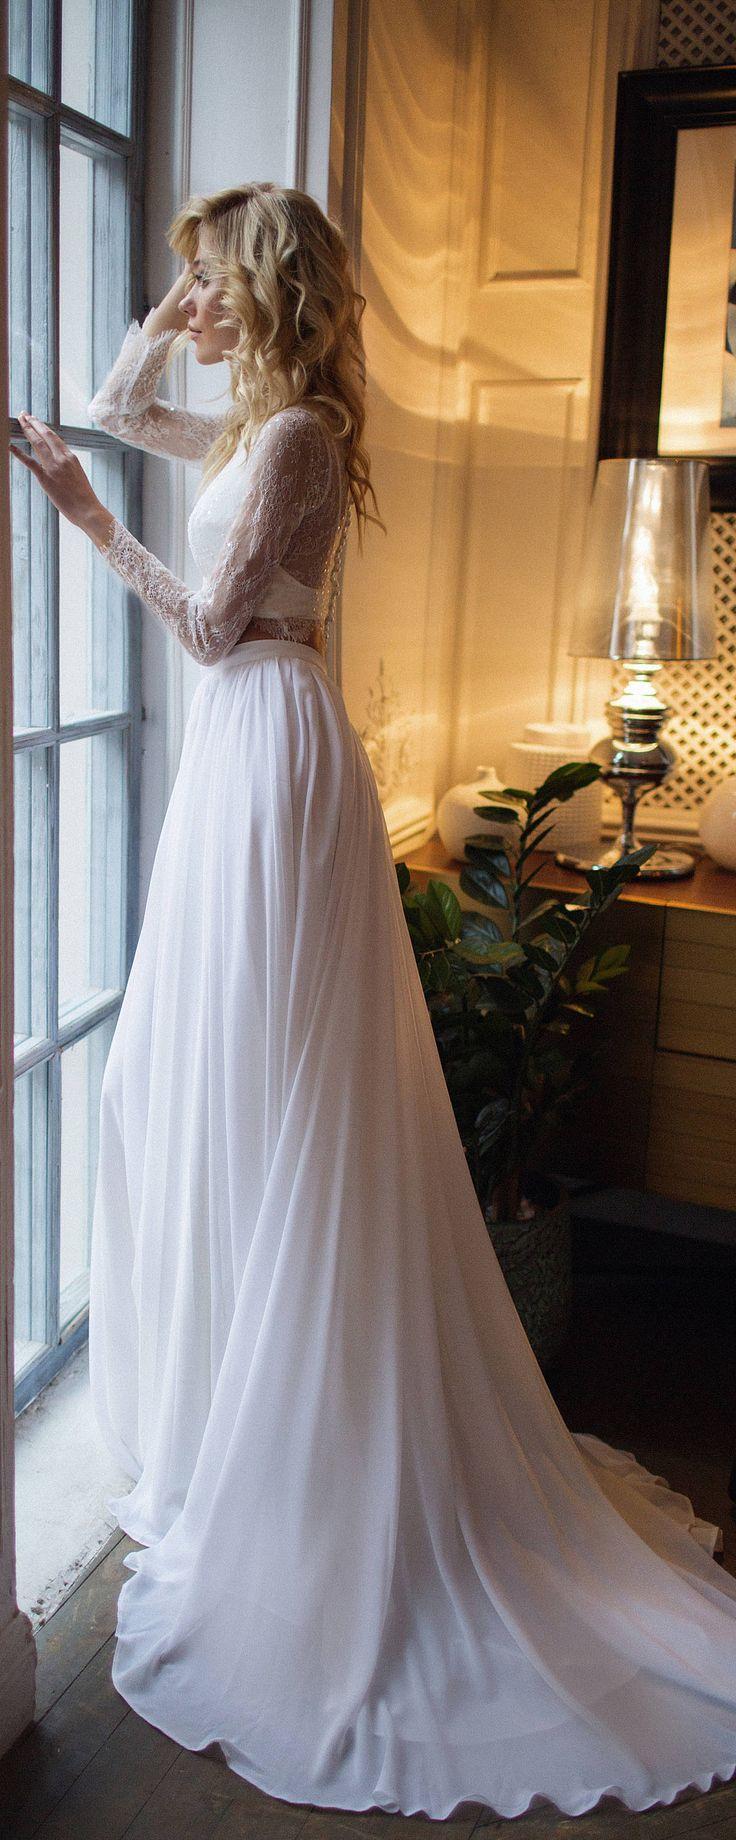 Wedding - Bridal Separates Top Long Sleeve, Tillie Lace Crop With Chiffon Skirt